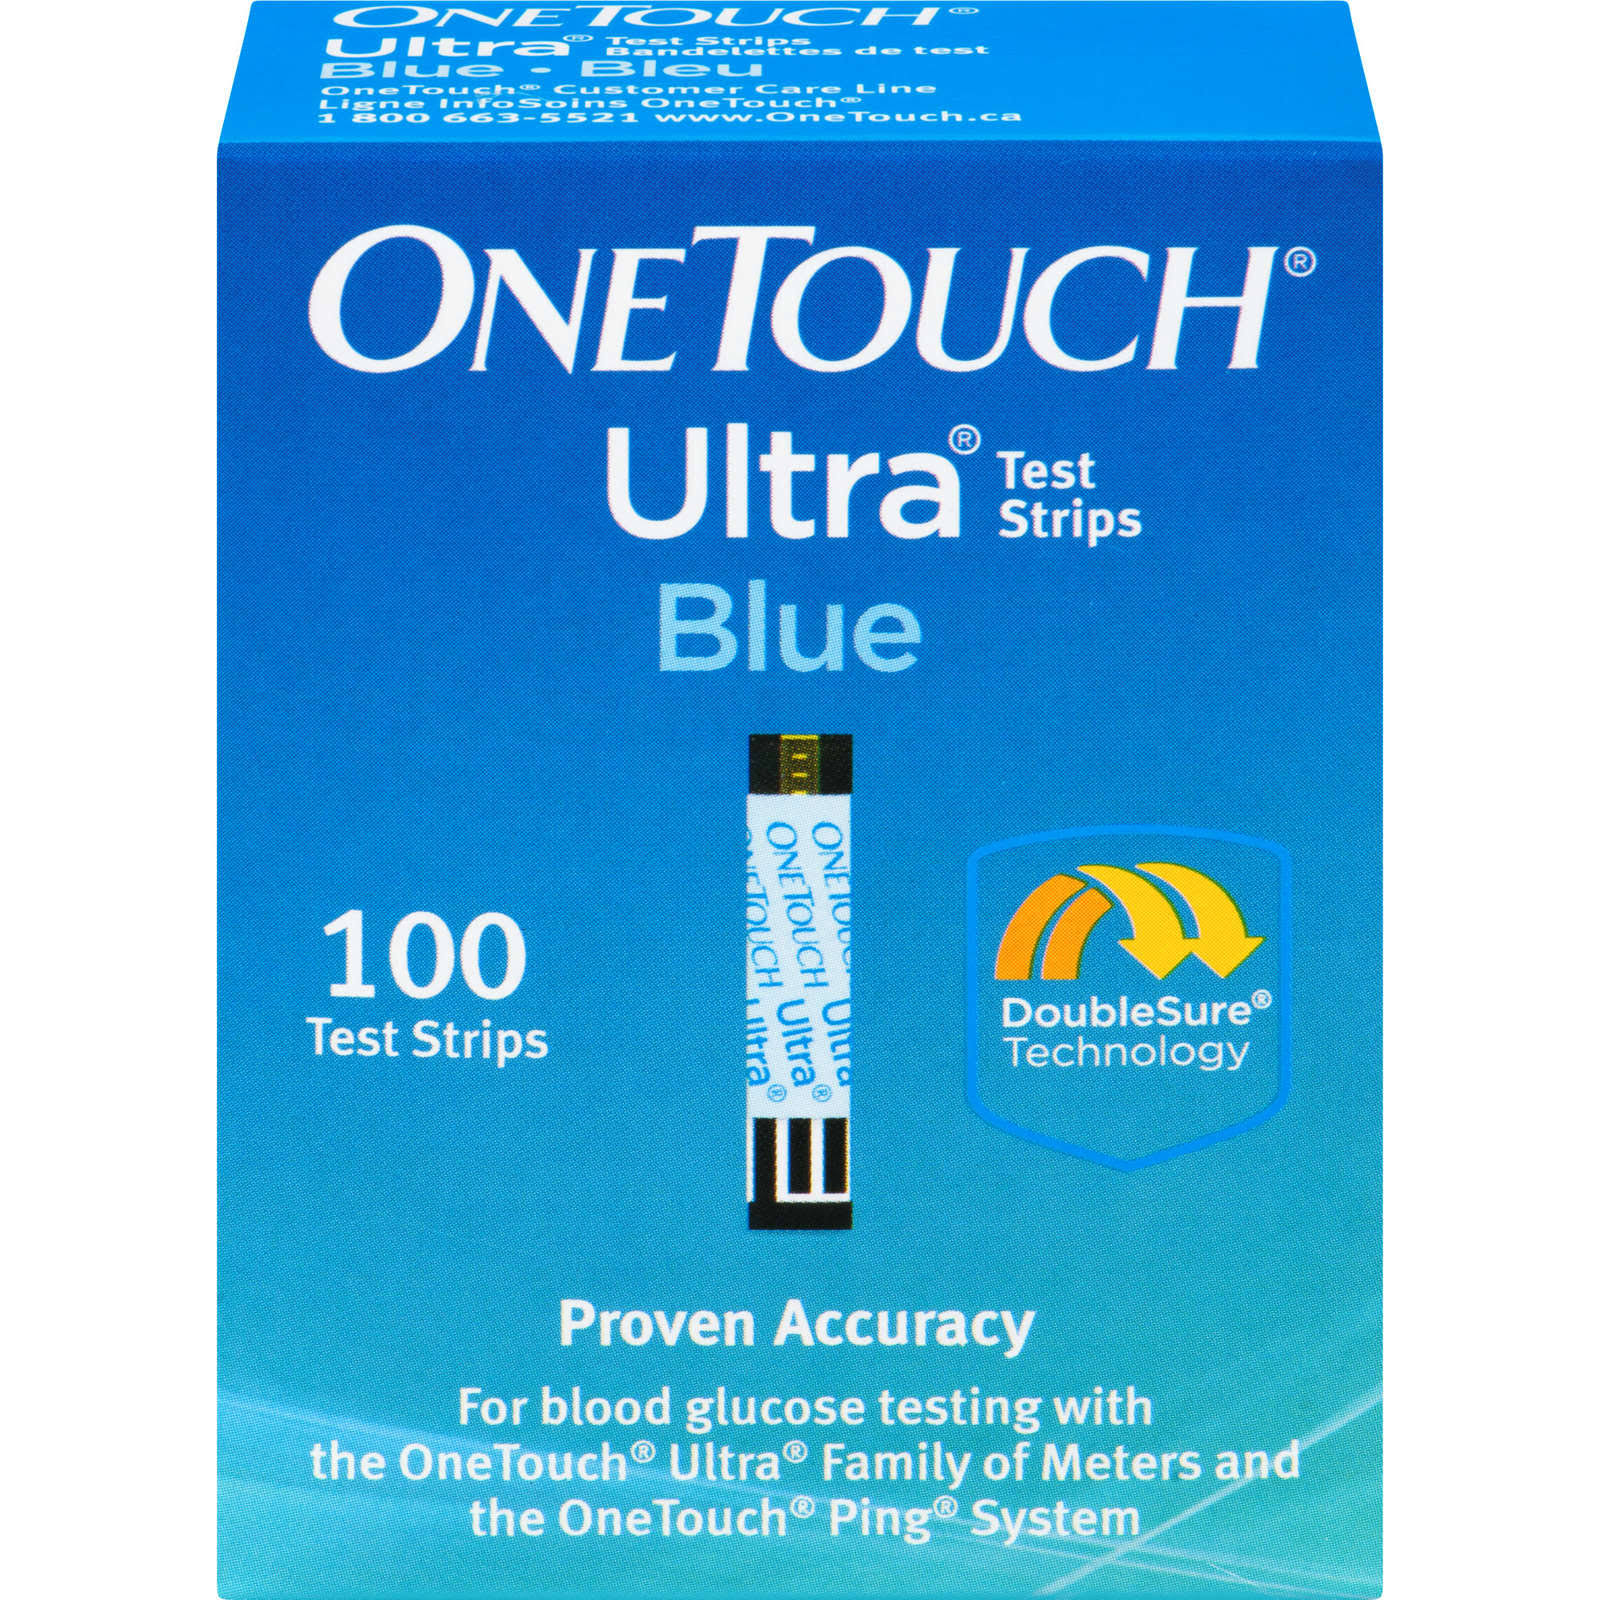 One Touch Ultra Blue Test Strips - 100ct